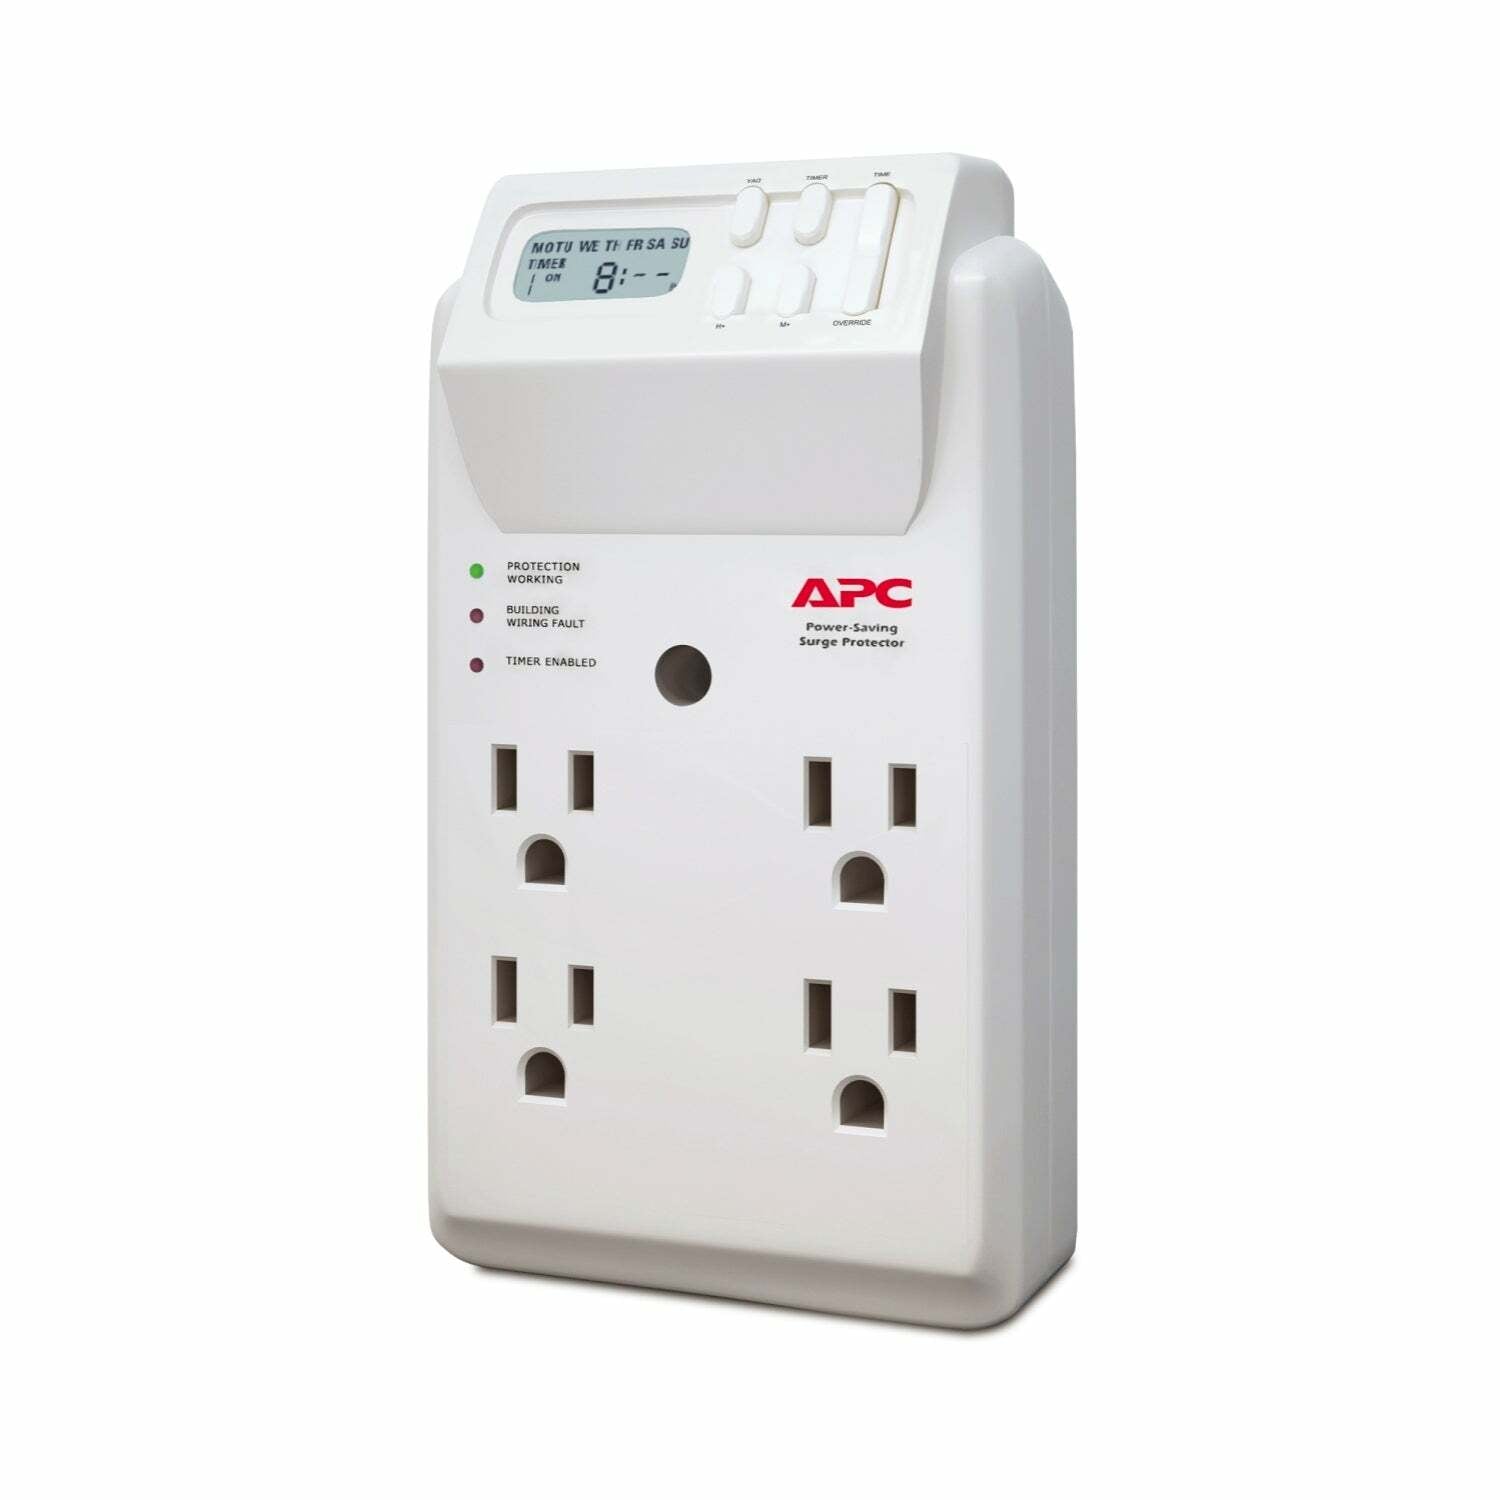 APC Power-Saving Timer Essential SurgeArrest, 4 Outlet Wall Tap, 120V